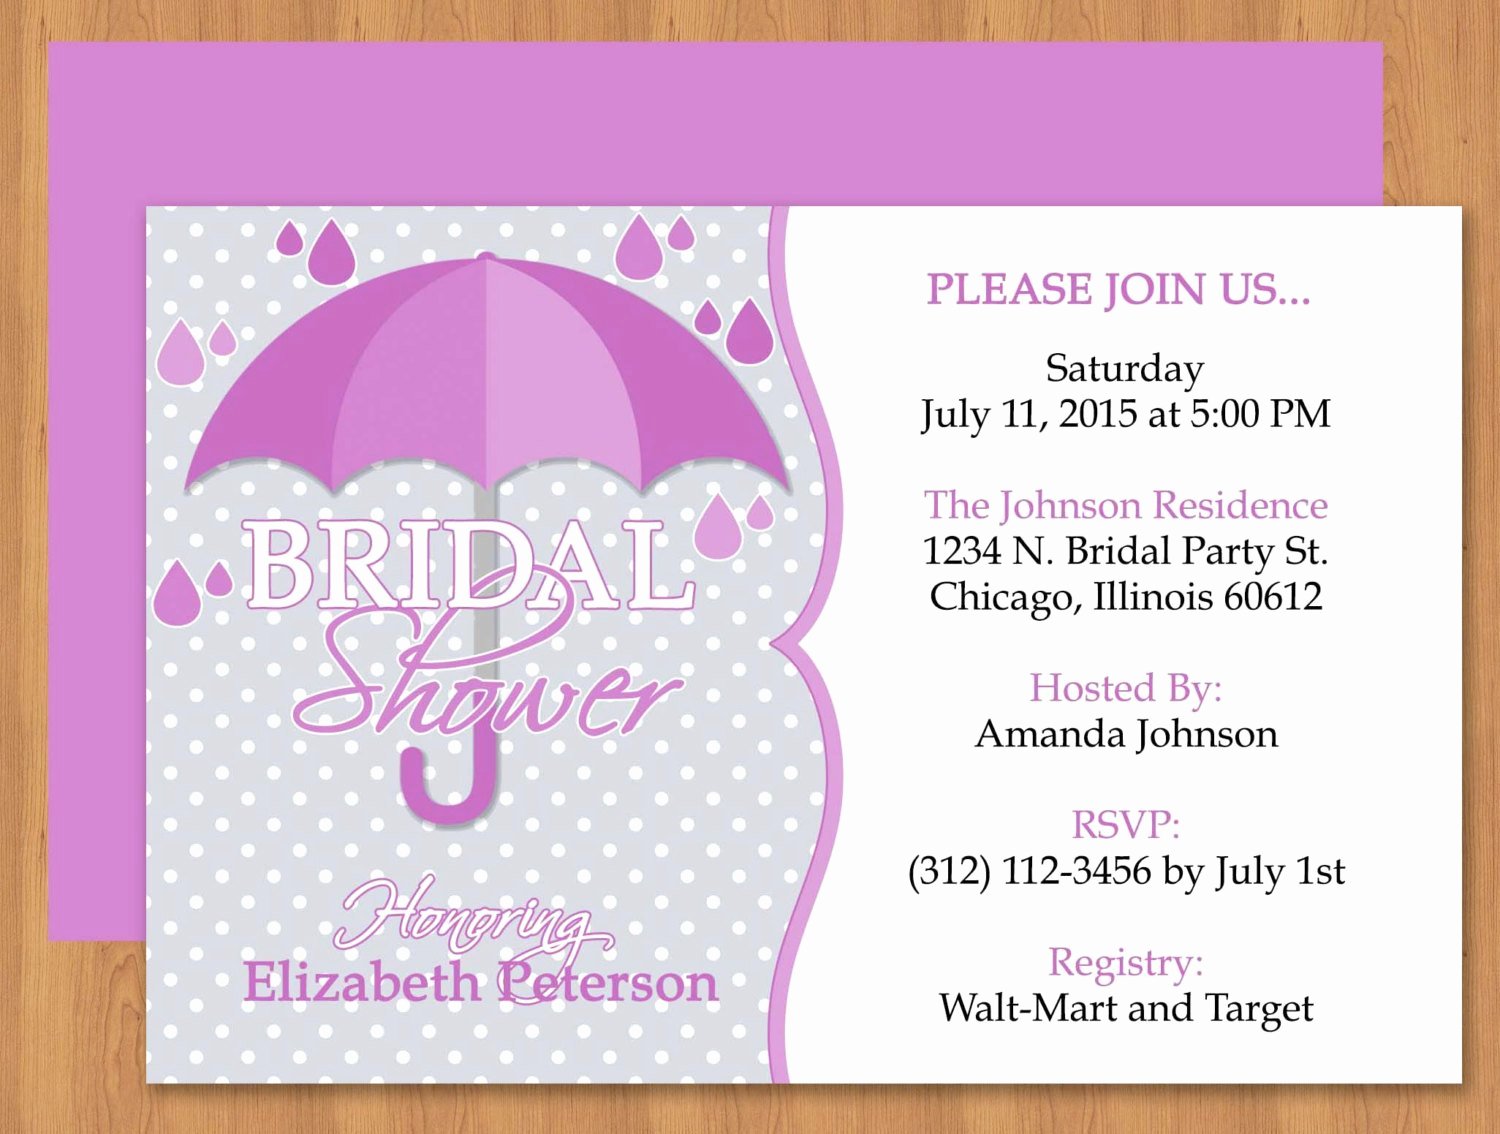 Bridal Shower Invitations Template Awesome Purple Umbrella Bridal Shower Invitation Editable Template